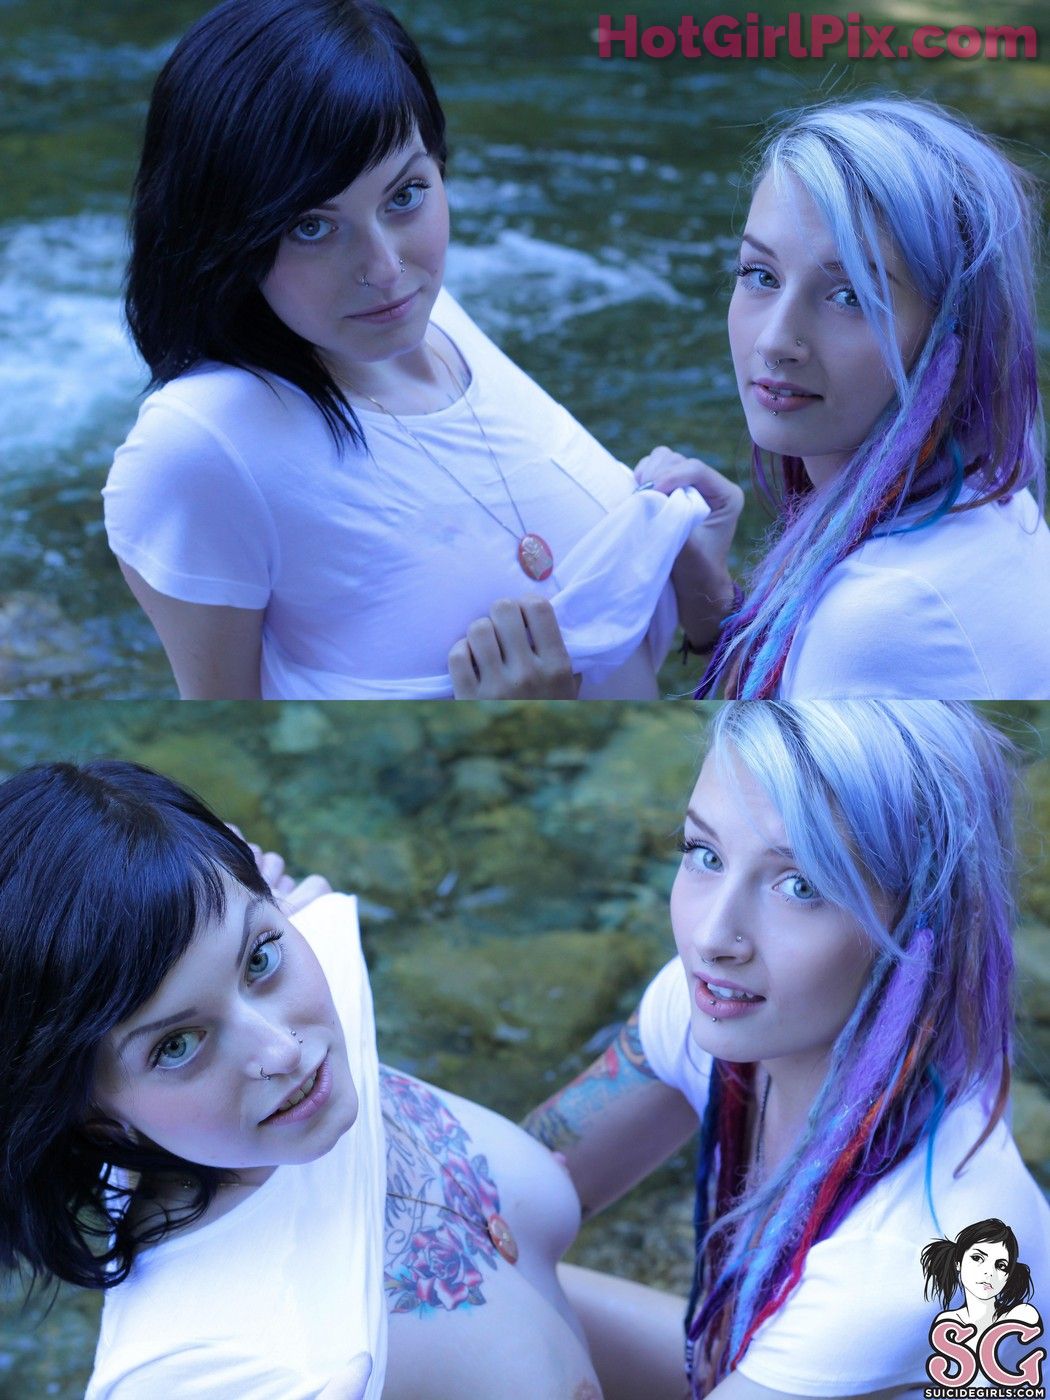 [Suicide Girls] Ceres & Stormyent - Blue is the Warmest Colour